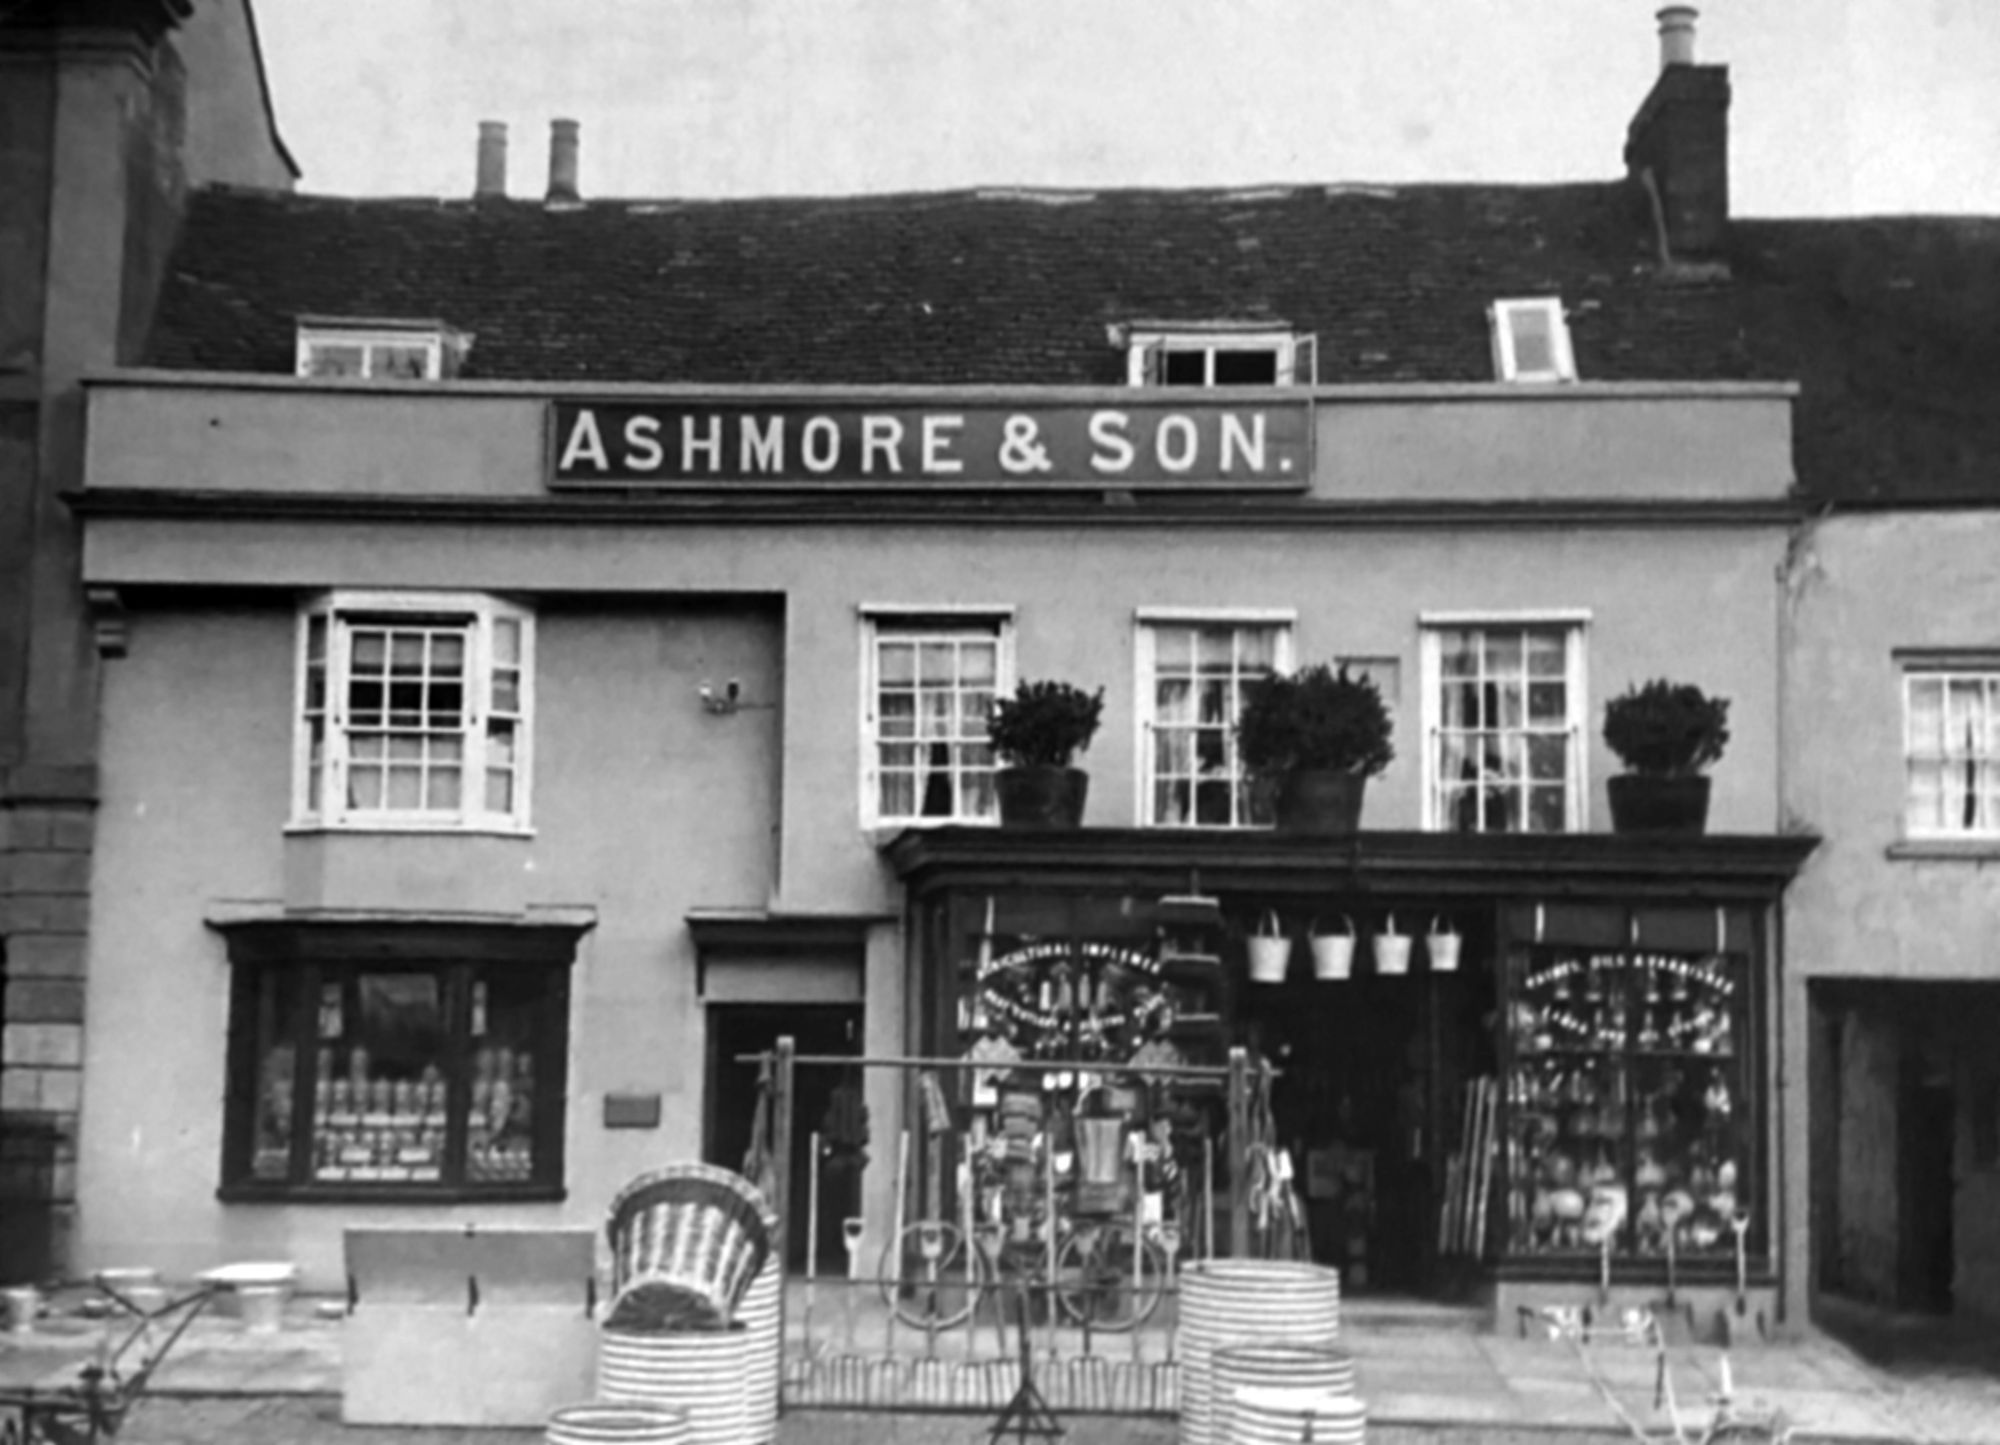 The frontage of Ashmore & Son in the 1920s.